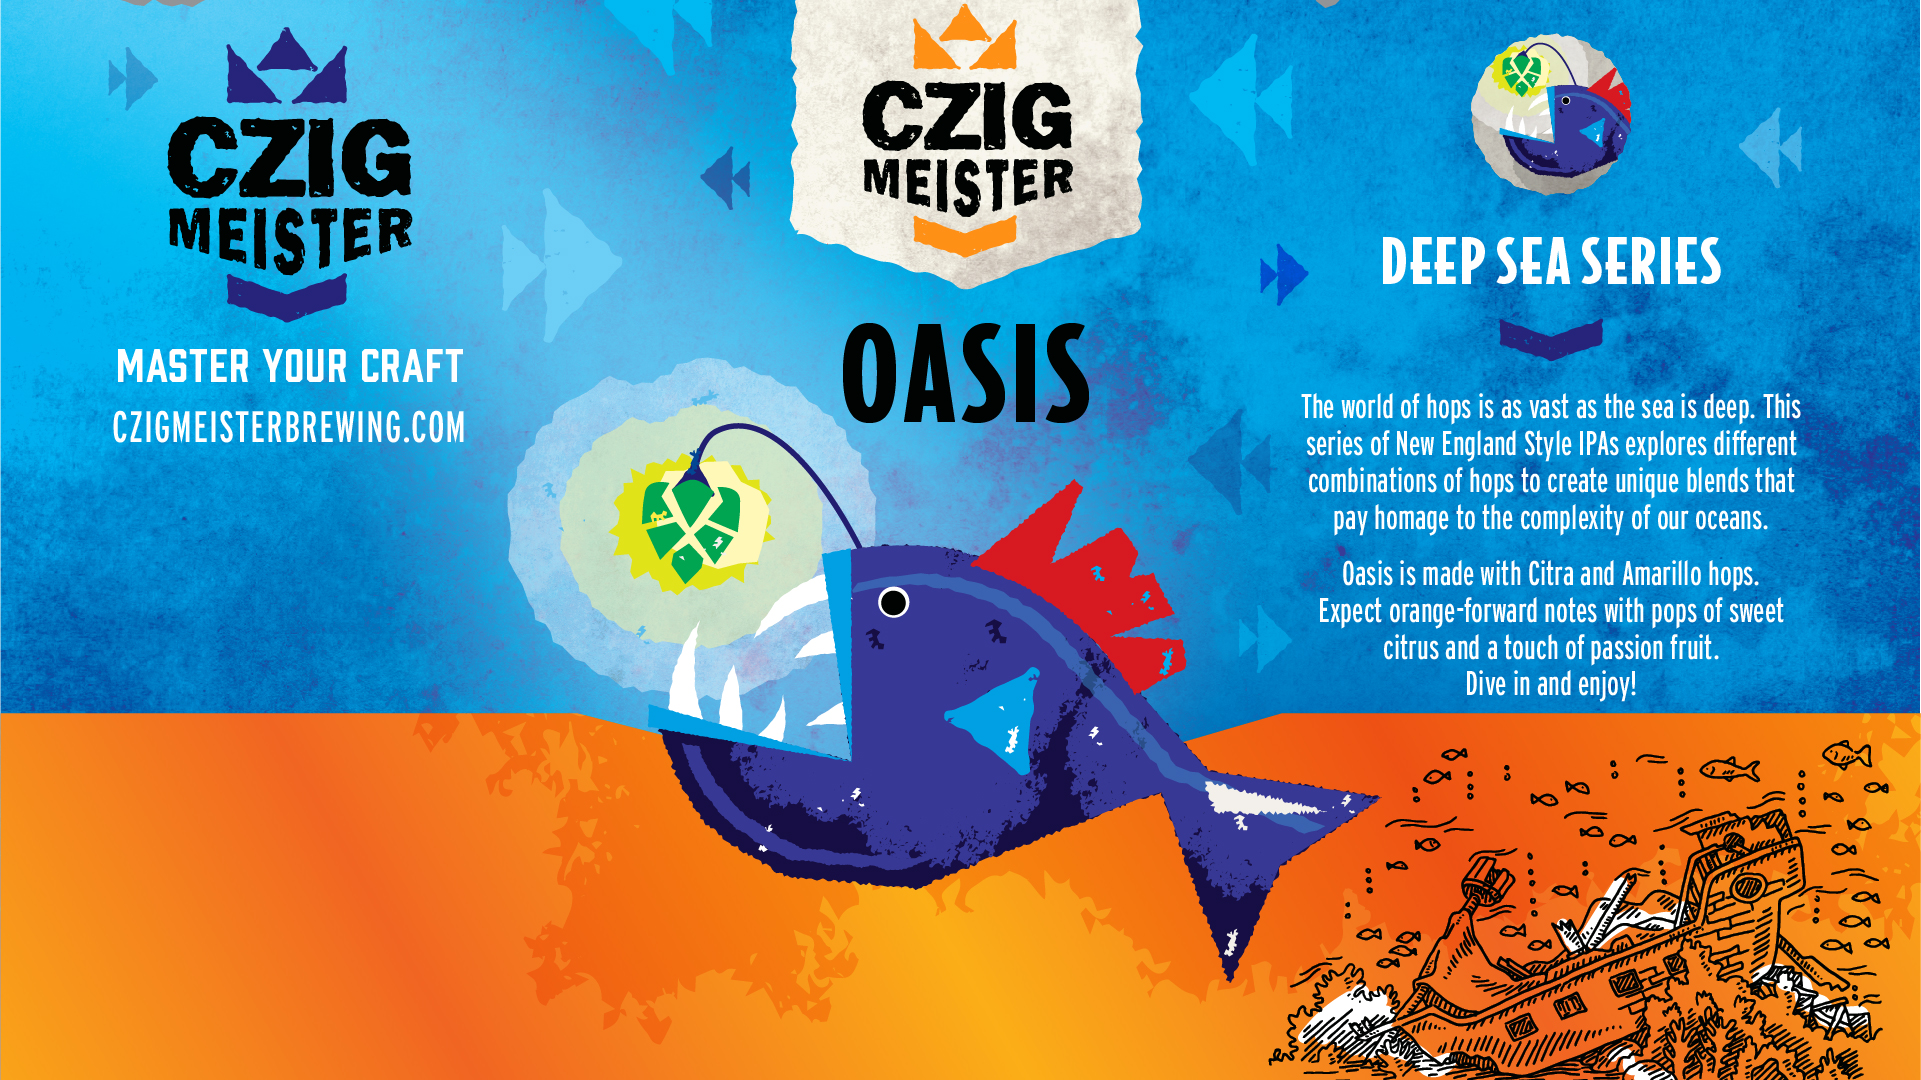 Deep Sea Series Oasis from Czig Meister Brewing Company releasing October 13th